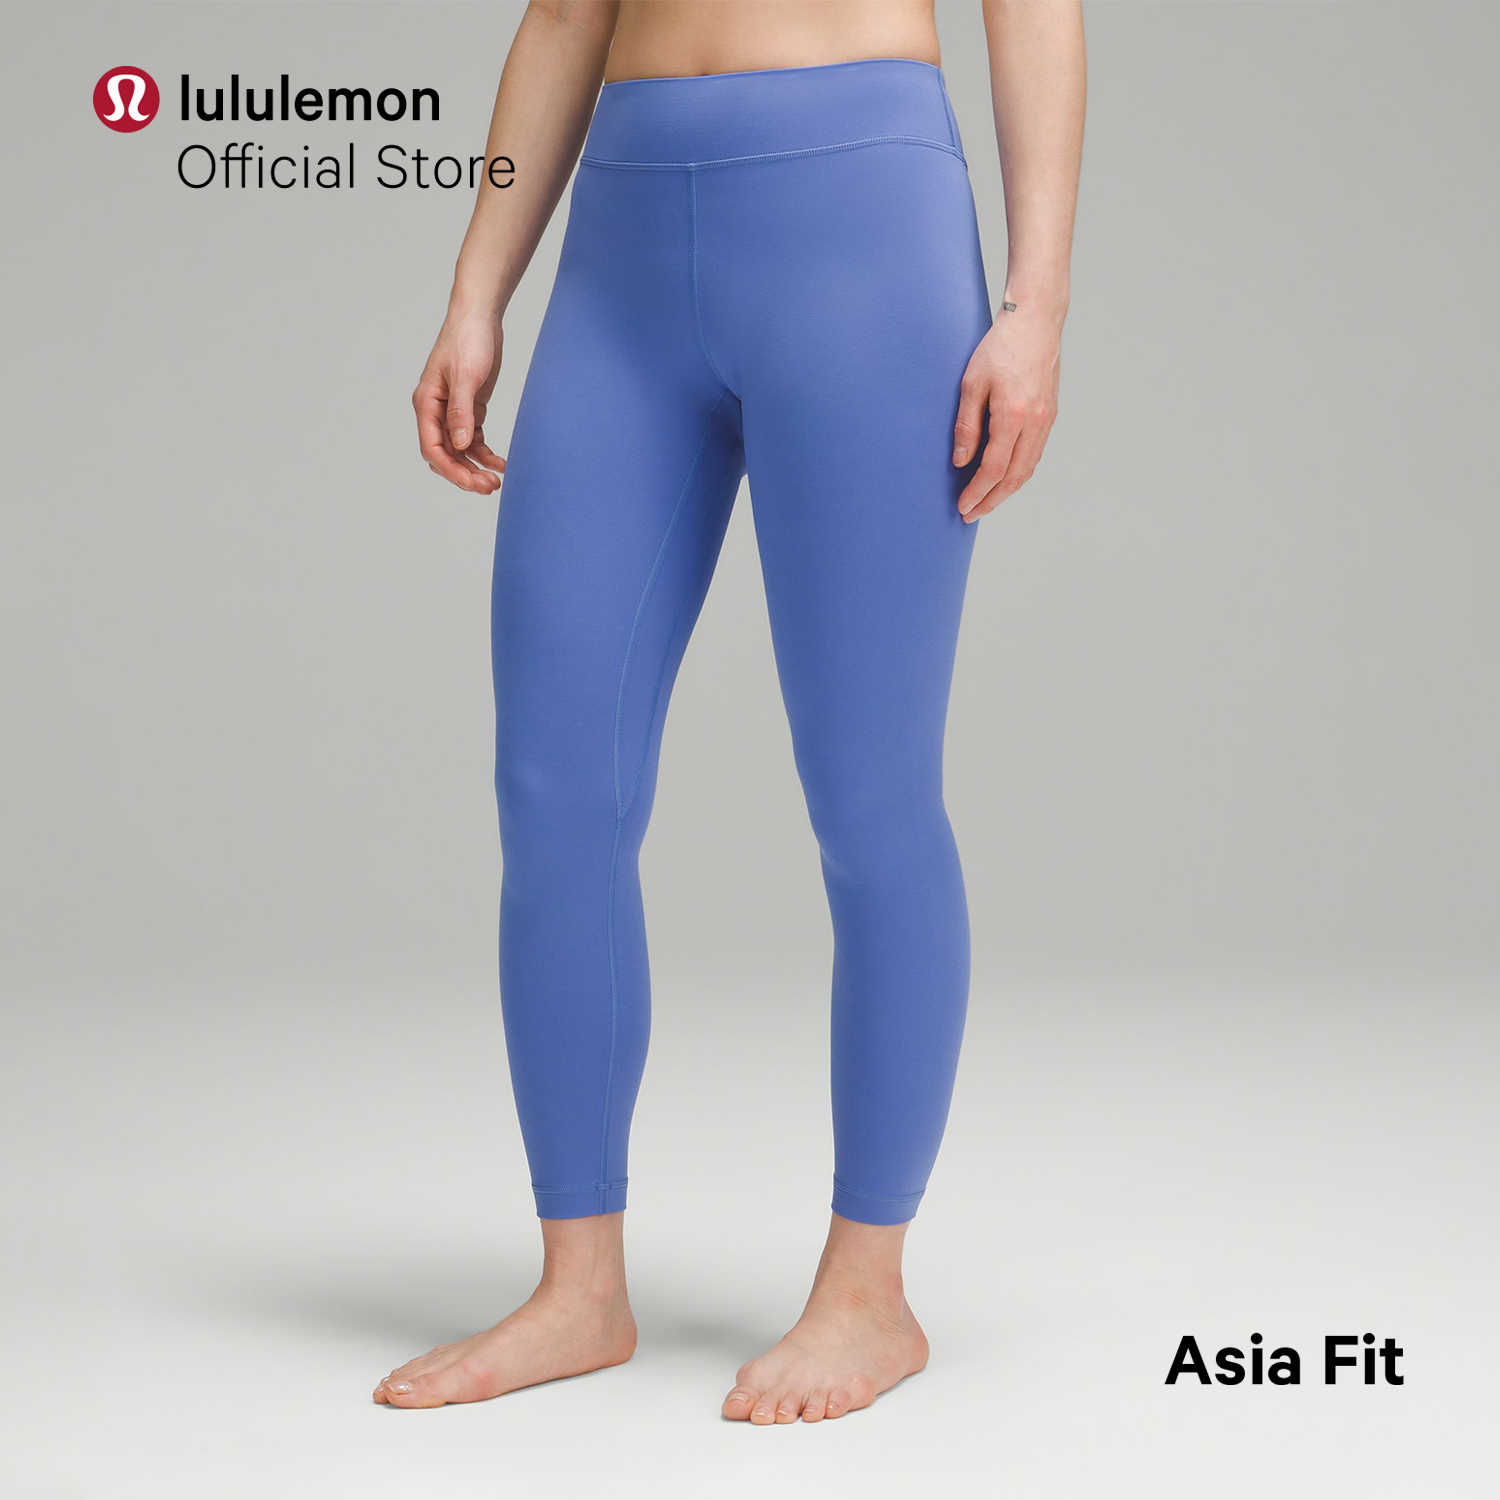 Wunder Train High-Rise Tight 24 *Asia Fit